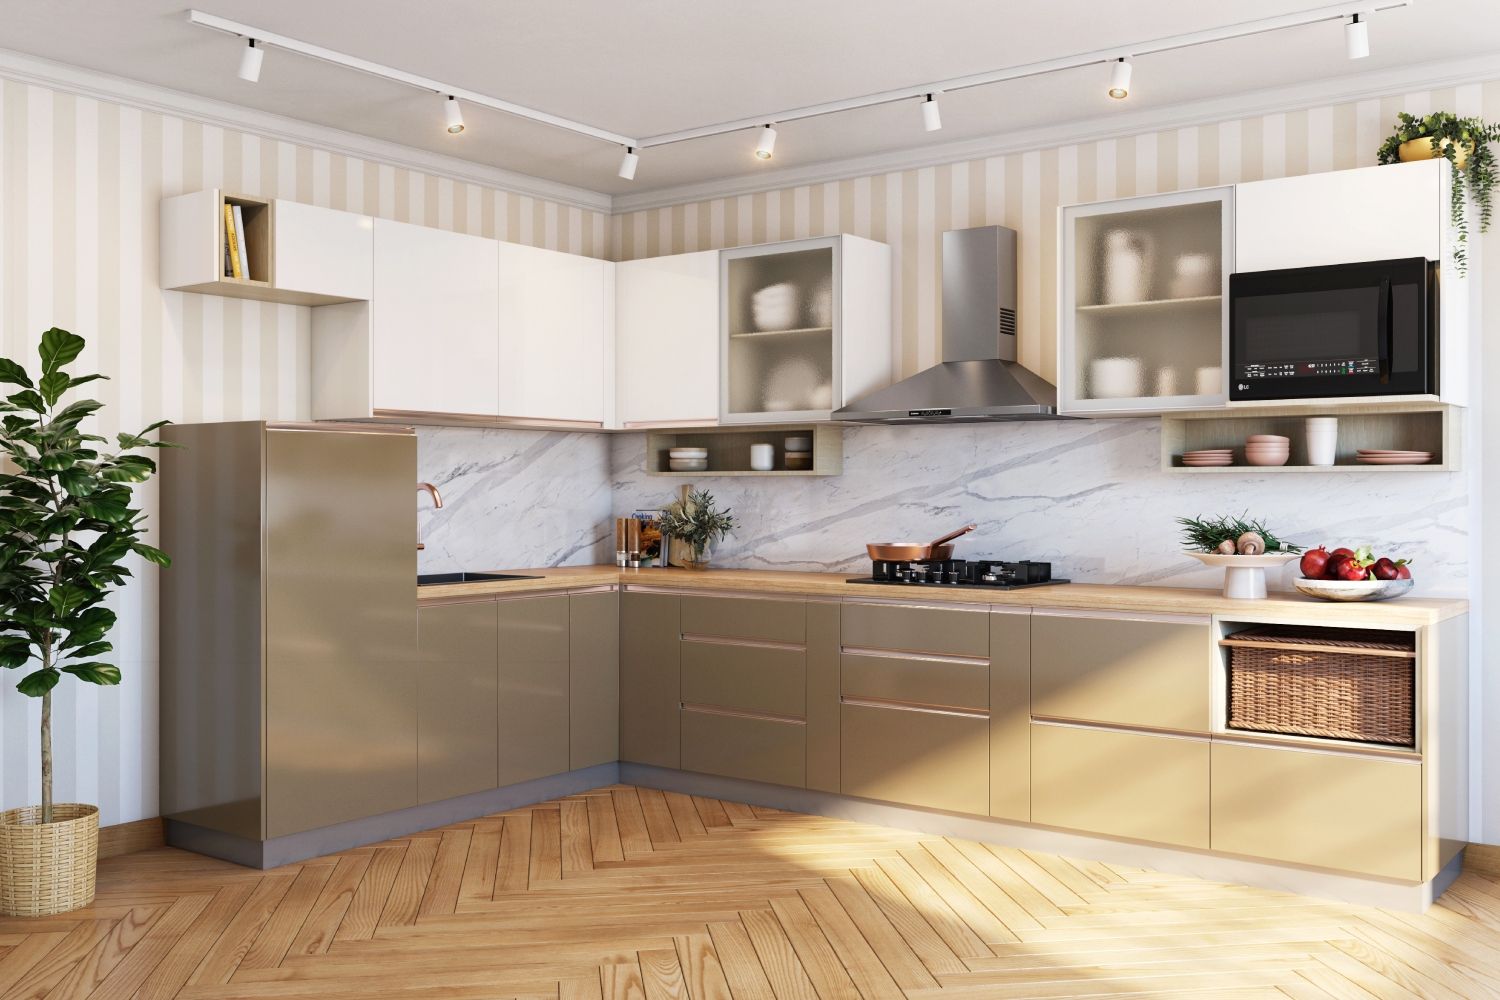 Modern Modular L-Shape Kitchen Design With Cappuccino And Frosty White Cabinets